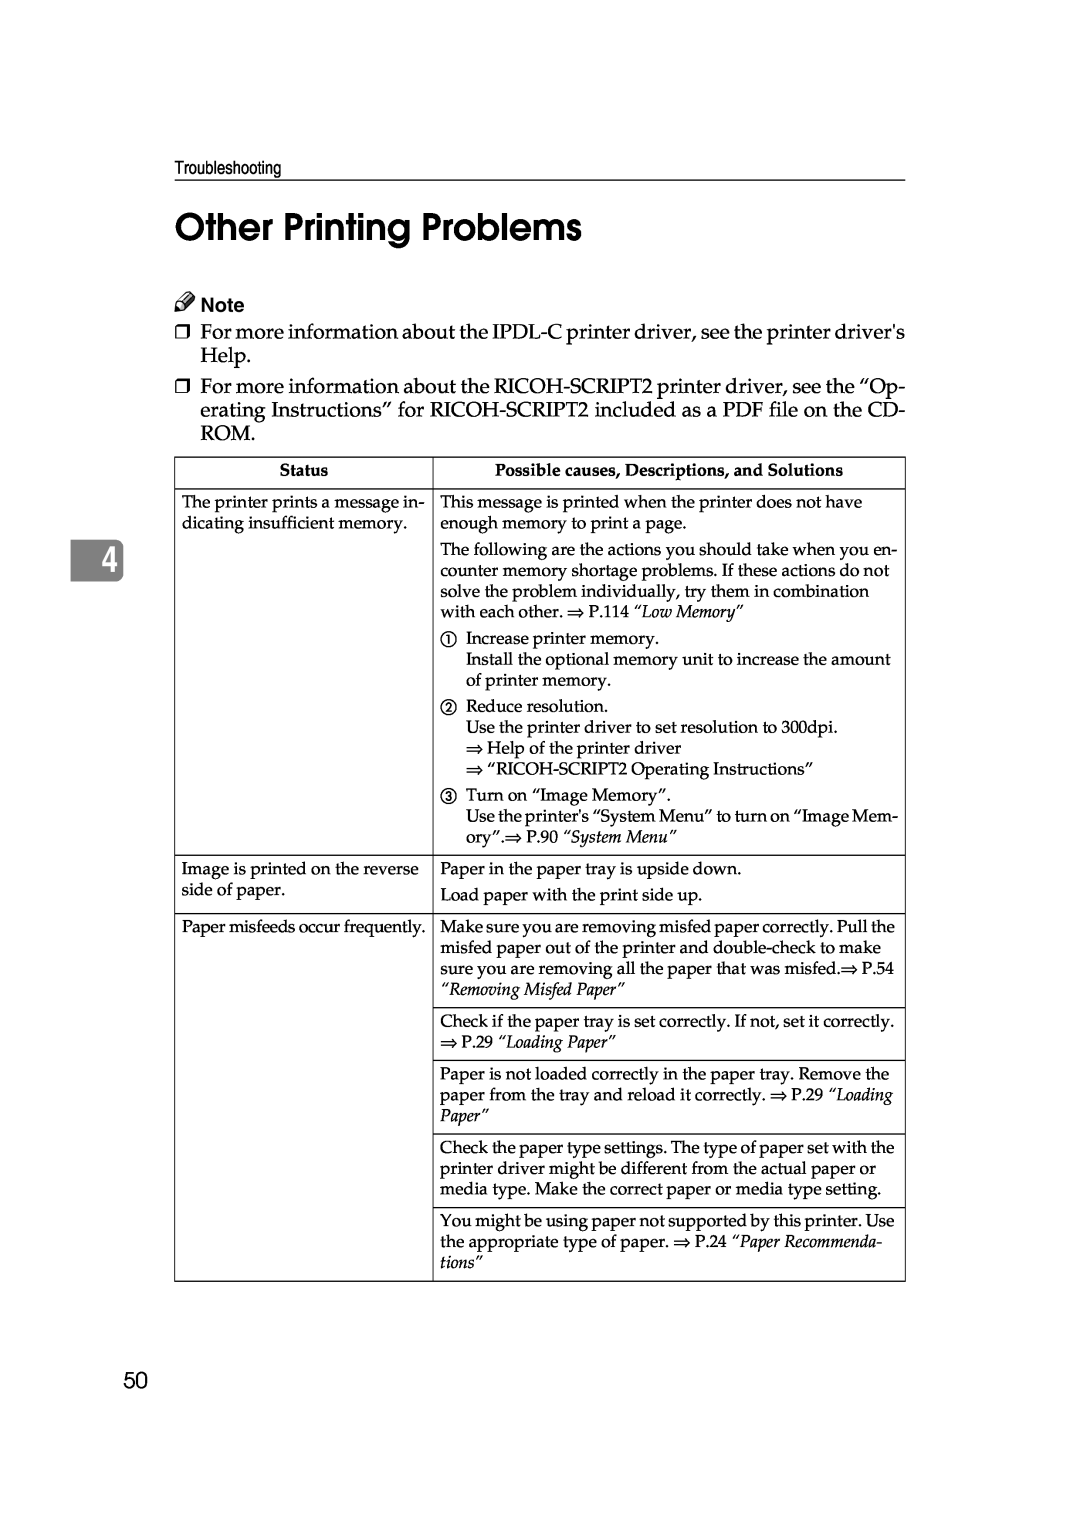 Lanier AP206 manual Other Printing Problems 